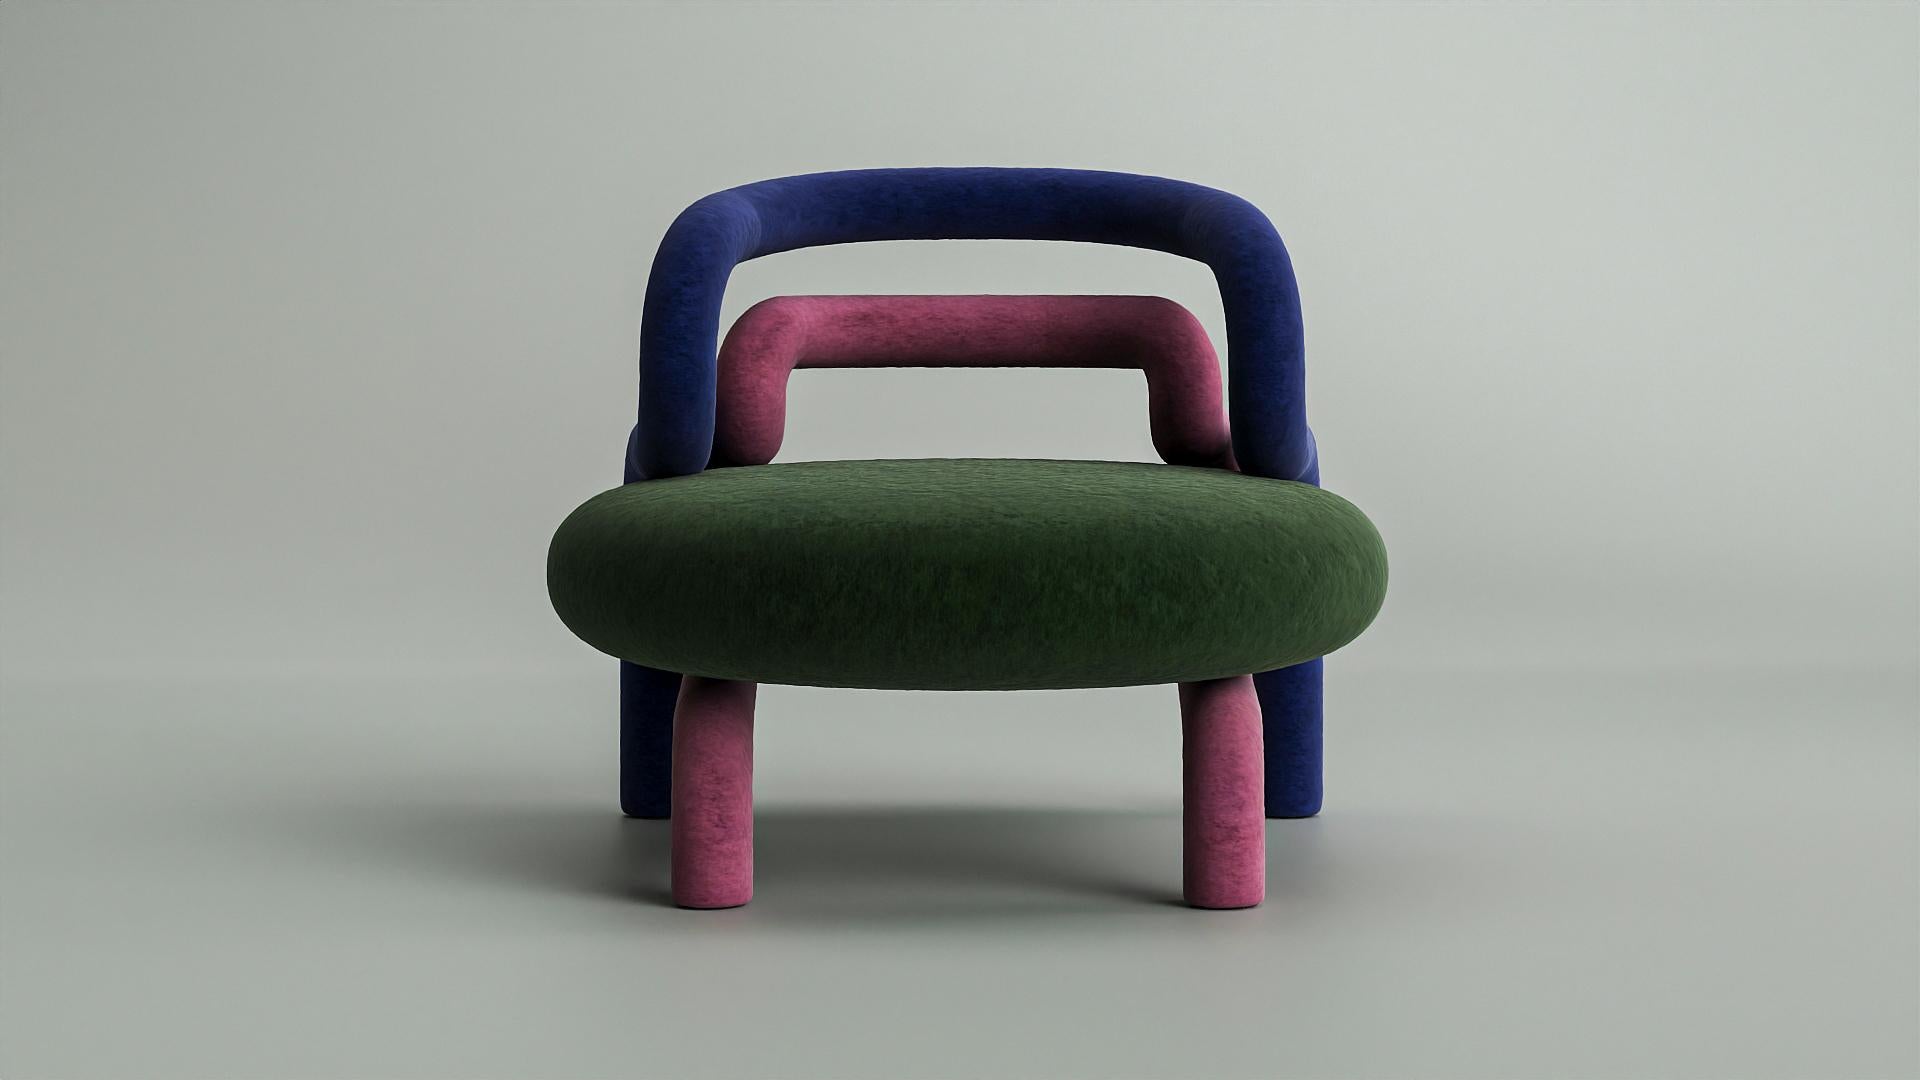 The Chloroplast chair is an interior item inspired by a playful reimagining of one of the most crucial plant cells. Beyond its collectible value and aesthetic appeal, the piece boasts practical comfort. Its whimsically curved legs, reminiscent of